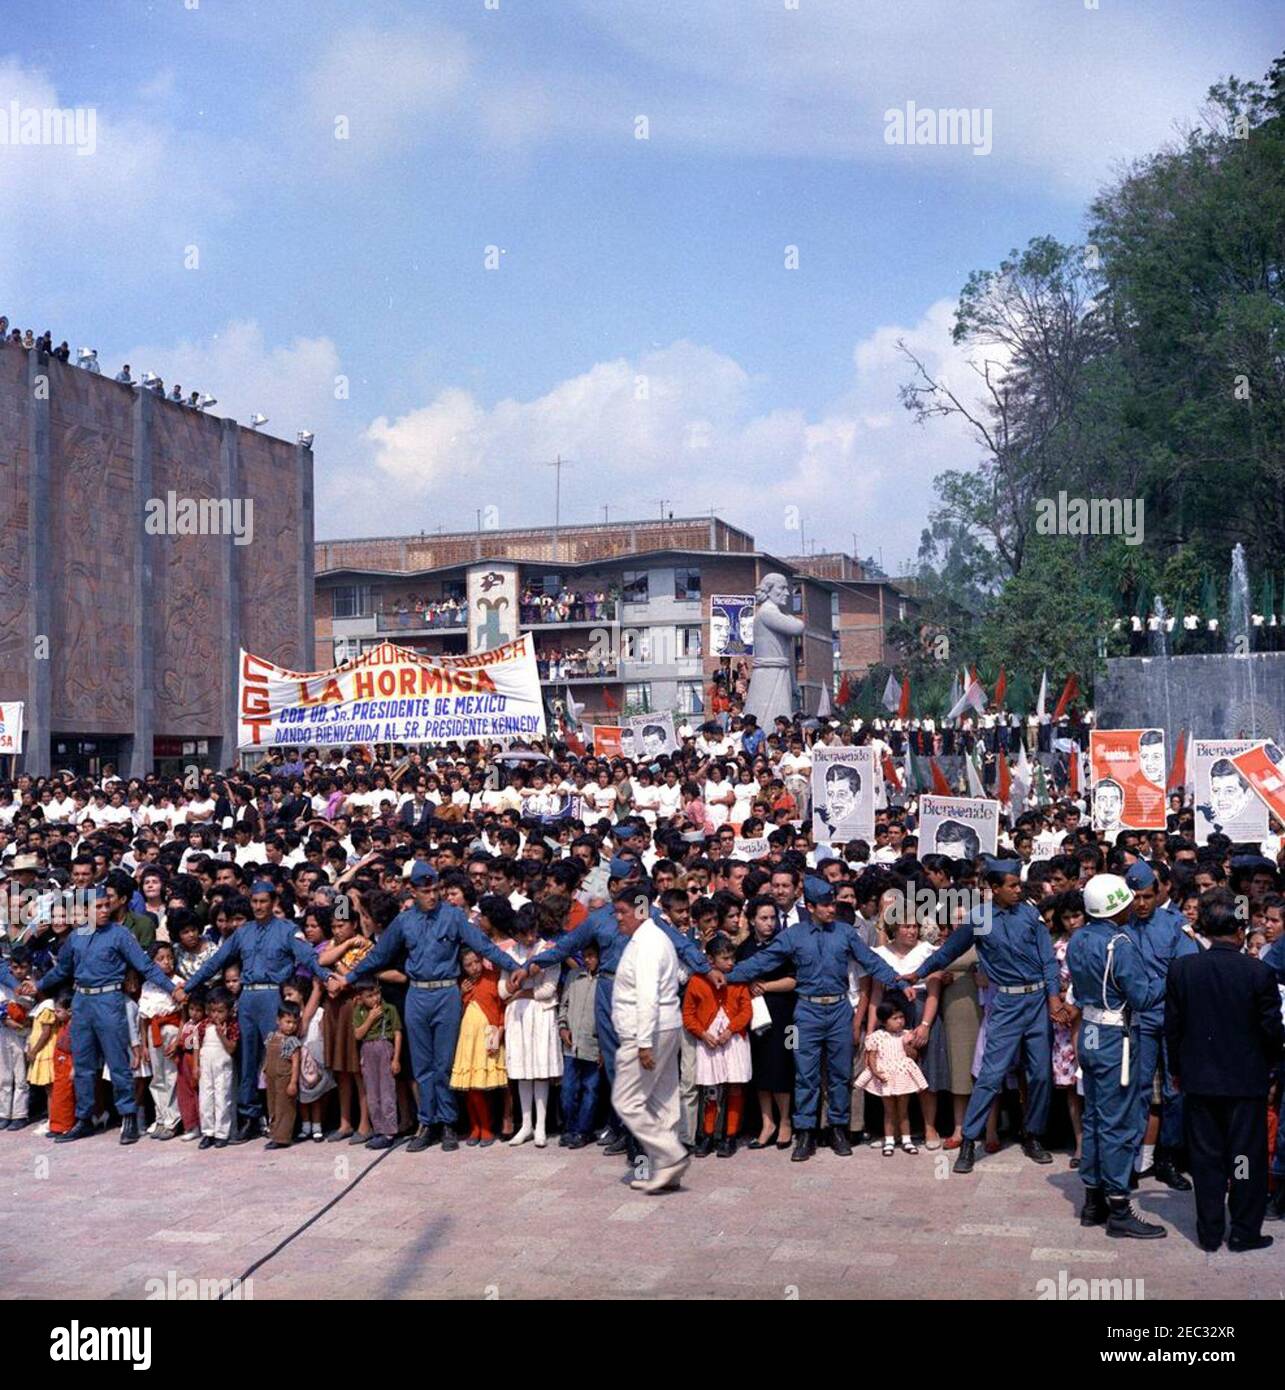 Trip to Mexico: Tour and address at the Independencia Housing Project, 9:35AM. Spectators gather to see President John F. Kennedy during his visit to the Unidad Independencia (Independencia Housing Project) in Mexico City, Mexico. Stock Photo